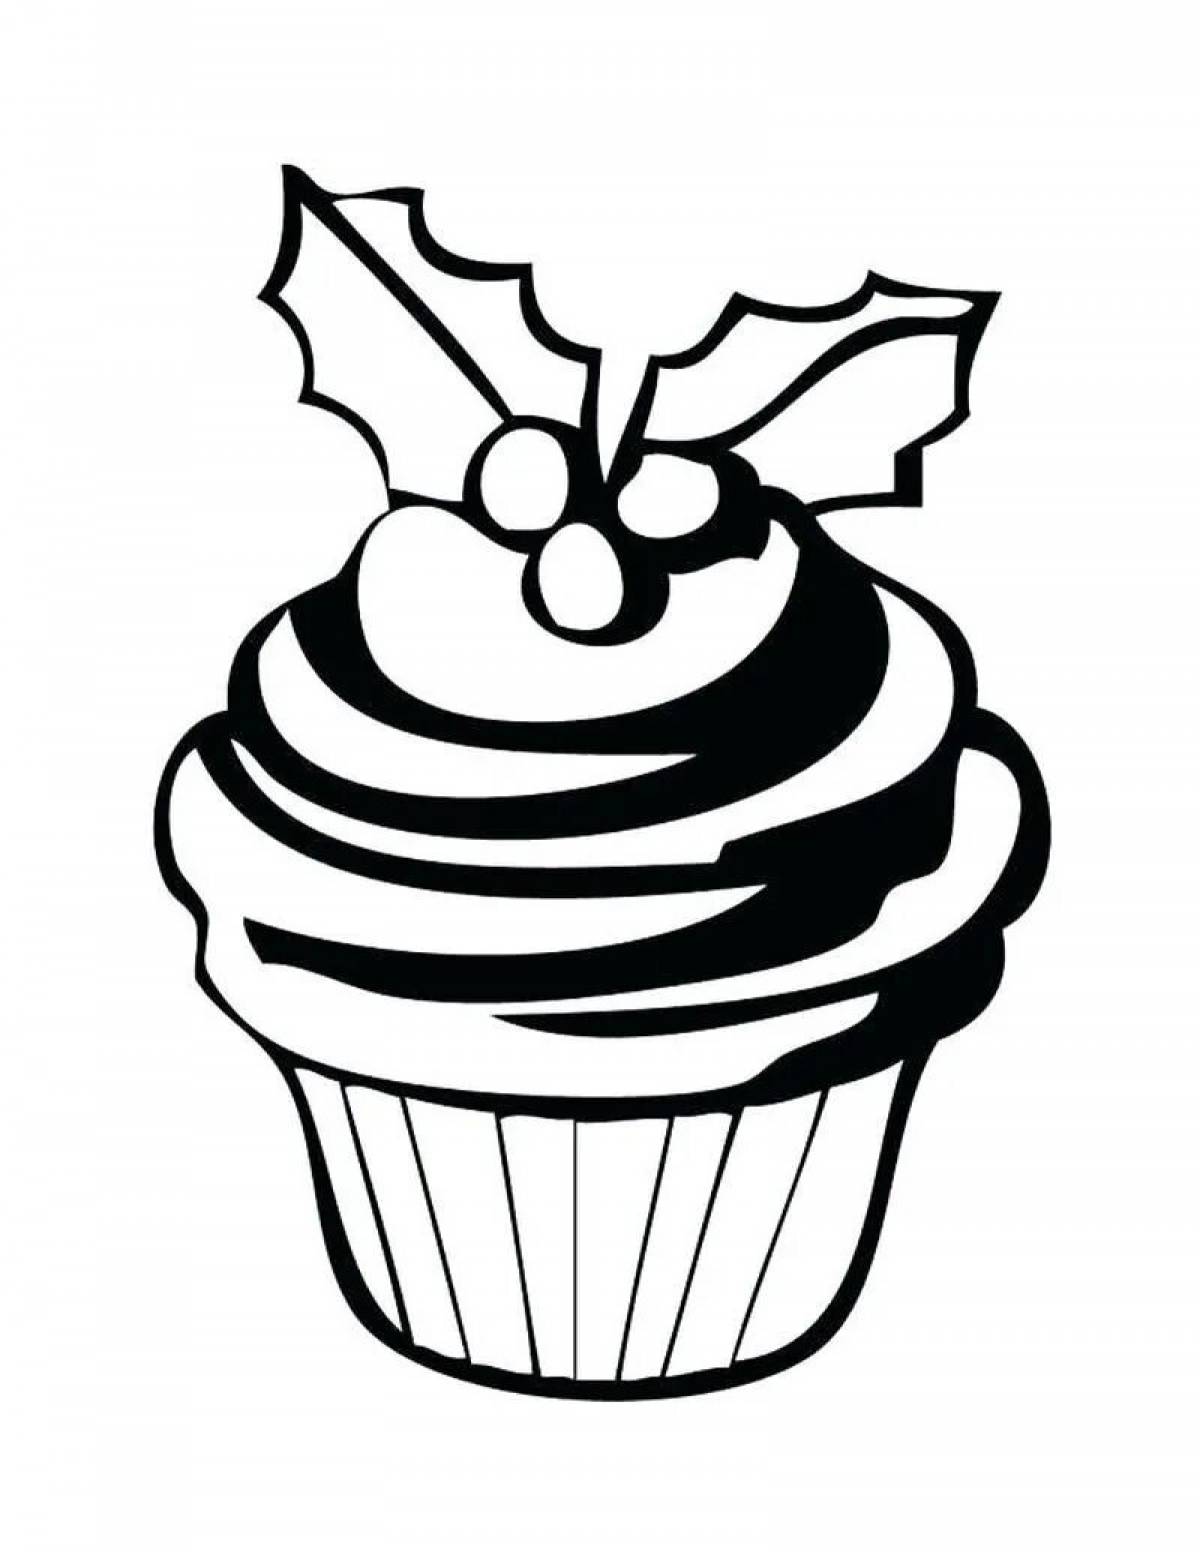 Cupcake coloring page with color filling